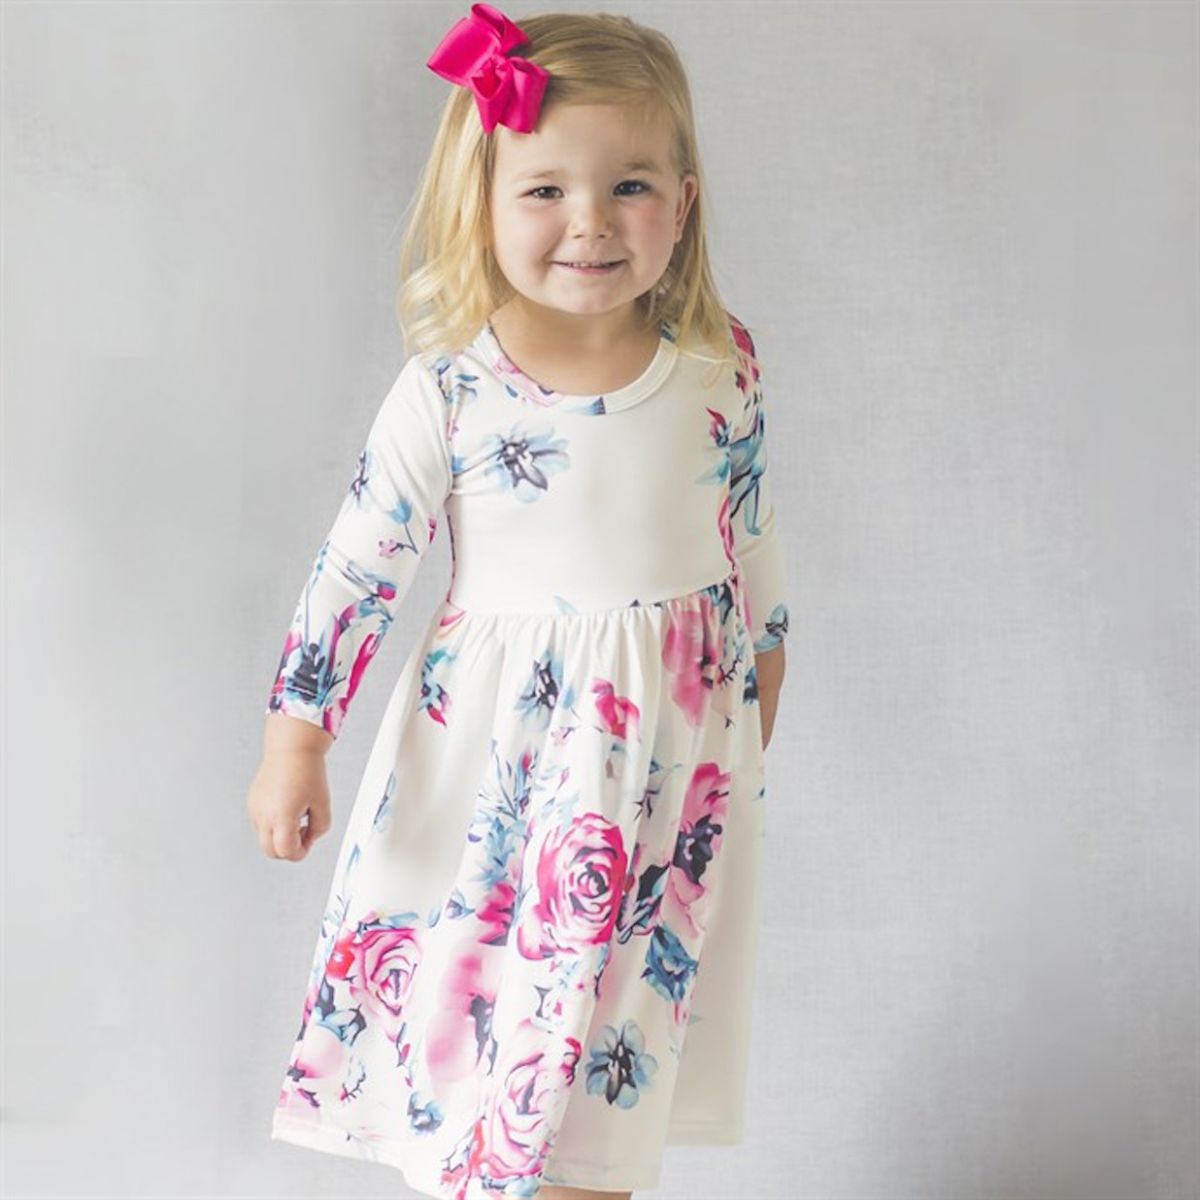 Girl's floral dress in 3 colors